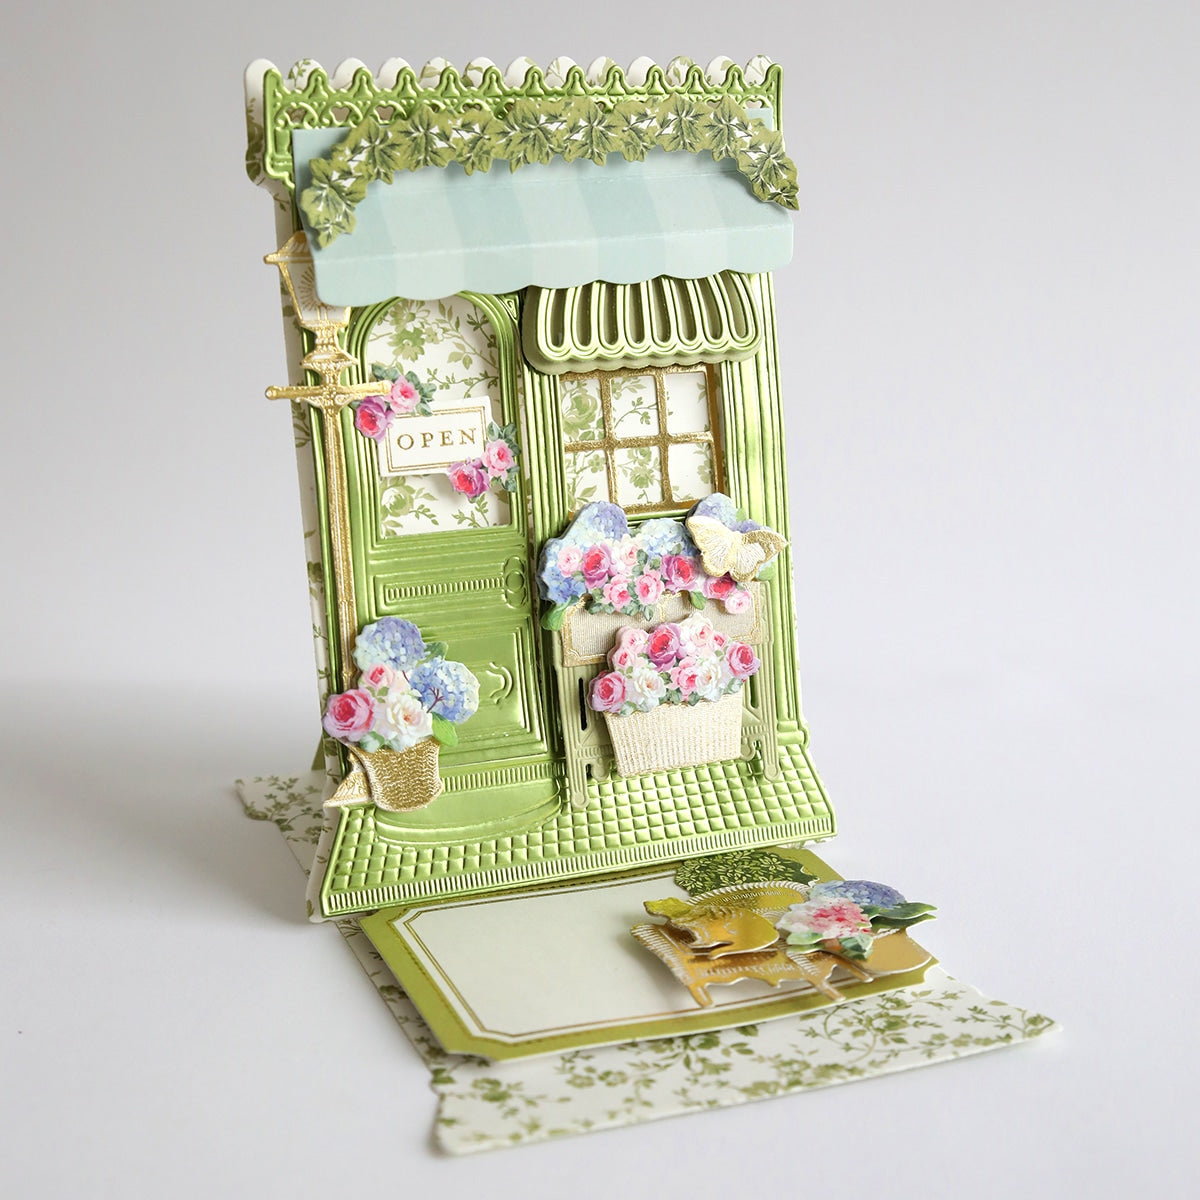 A small green Flower Shop 3D Easel Dies building with flowers on it.